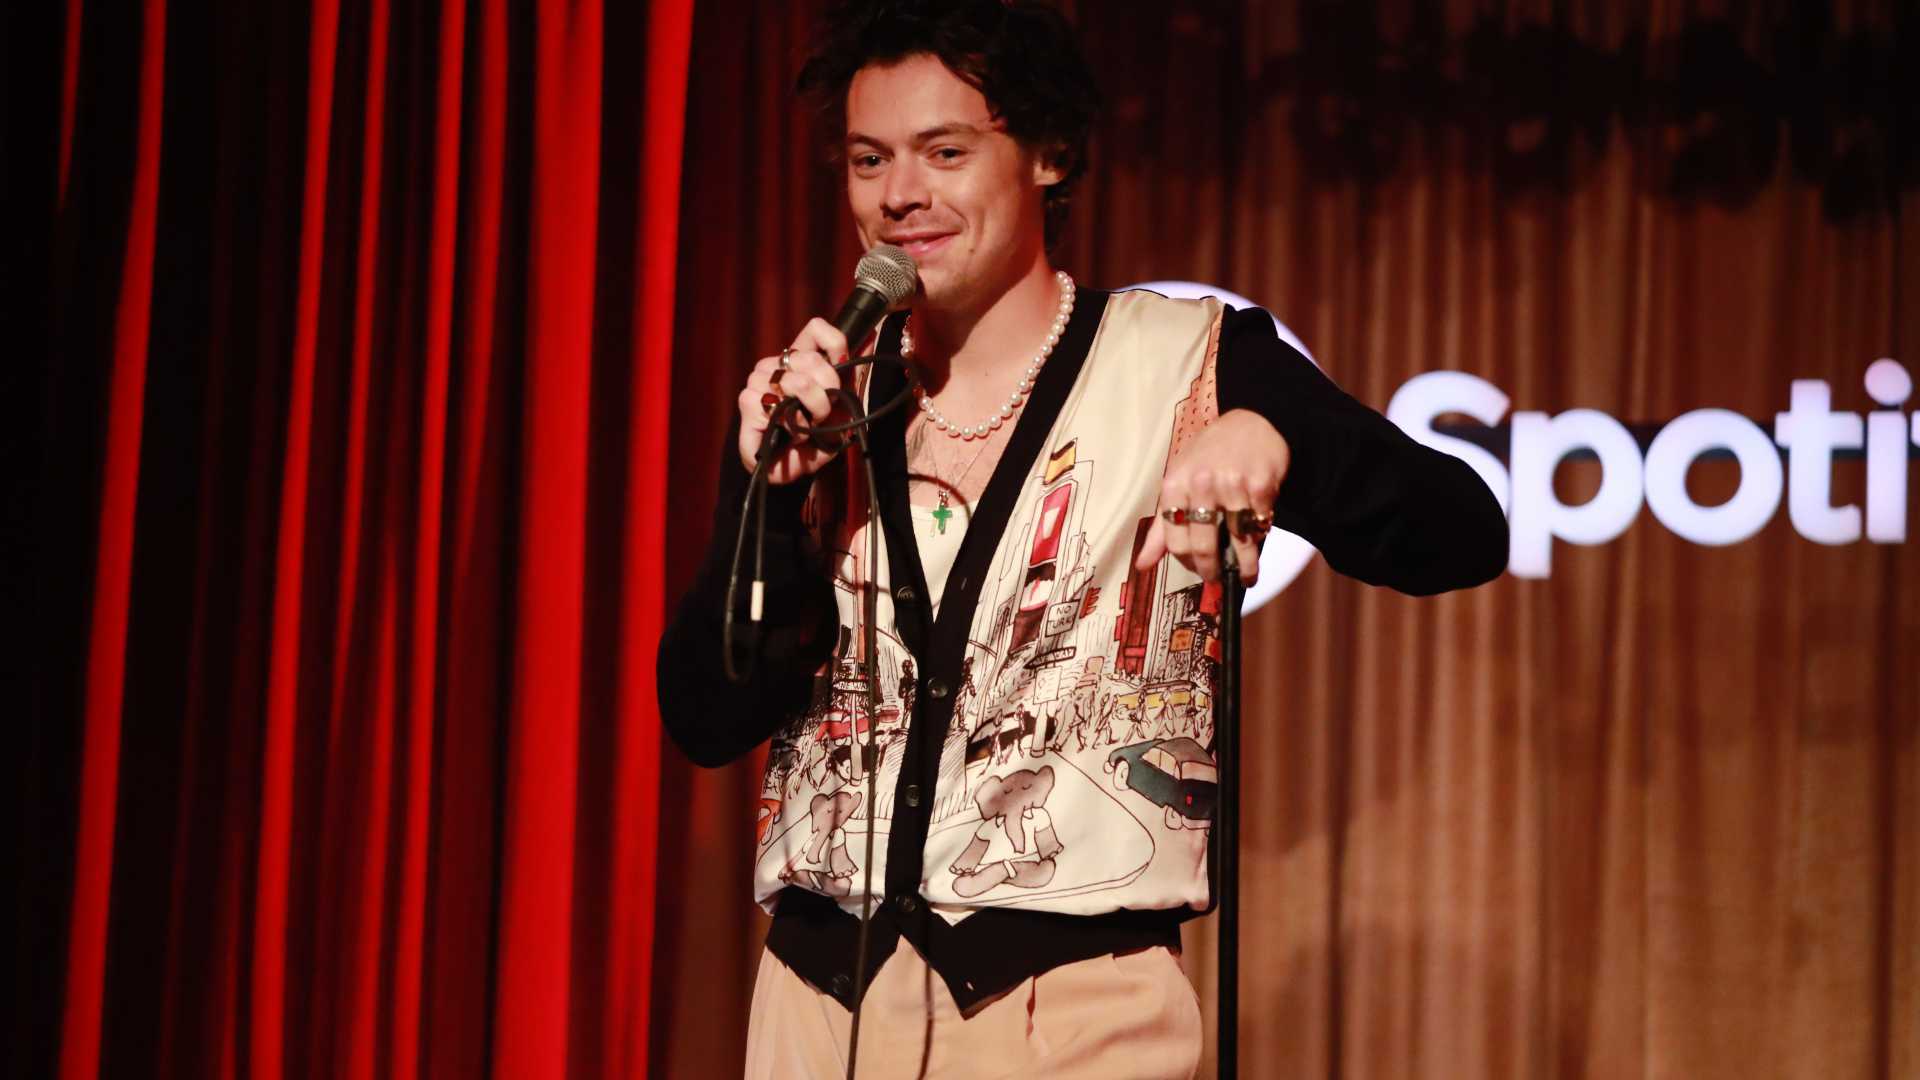 Harry Styles at Spotify Session – December 2019